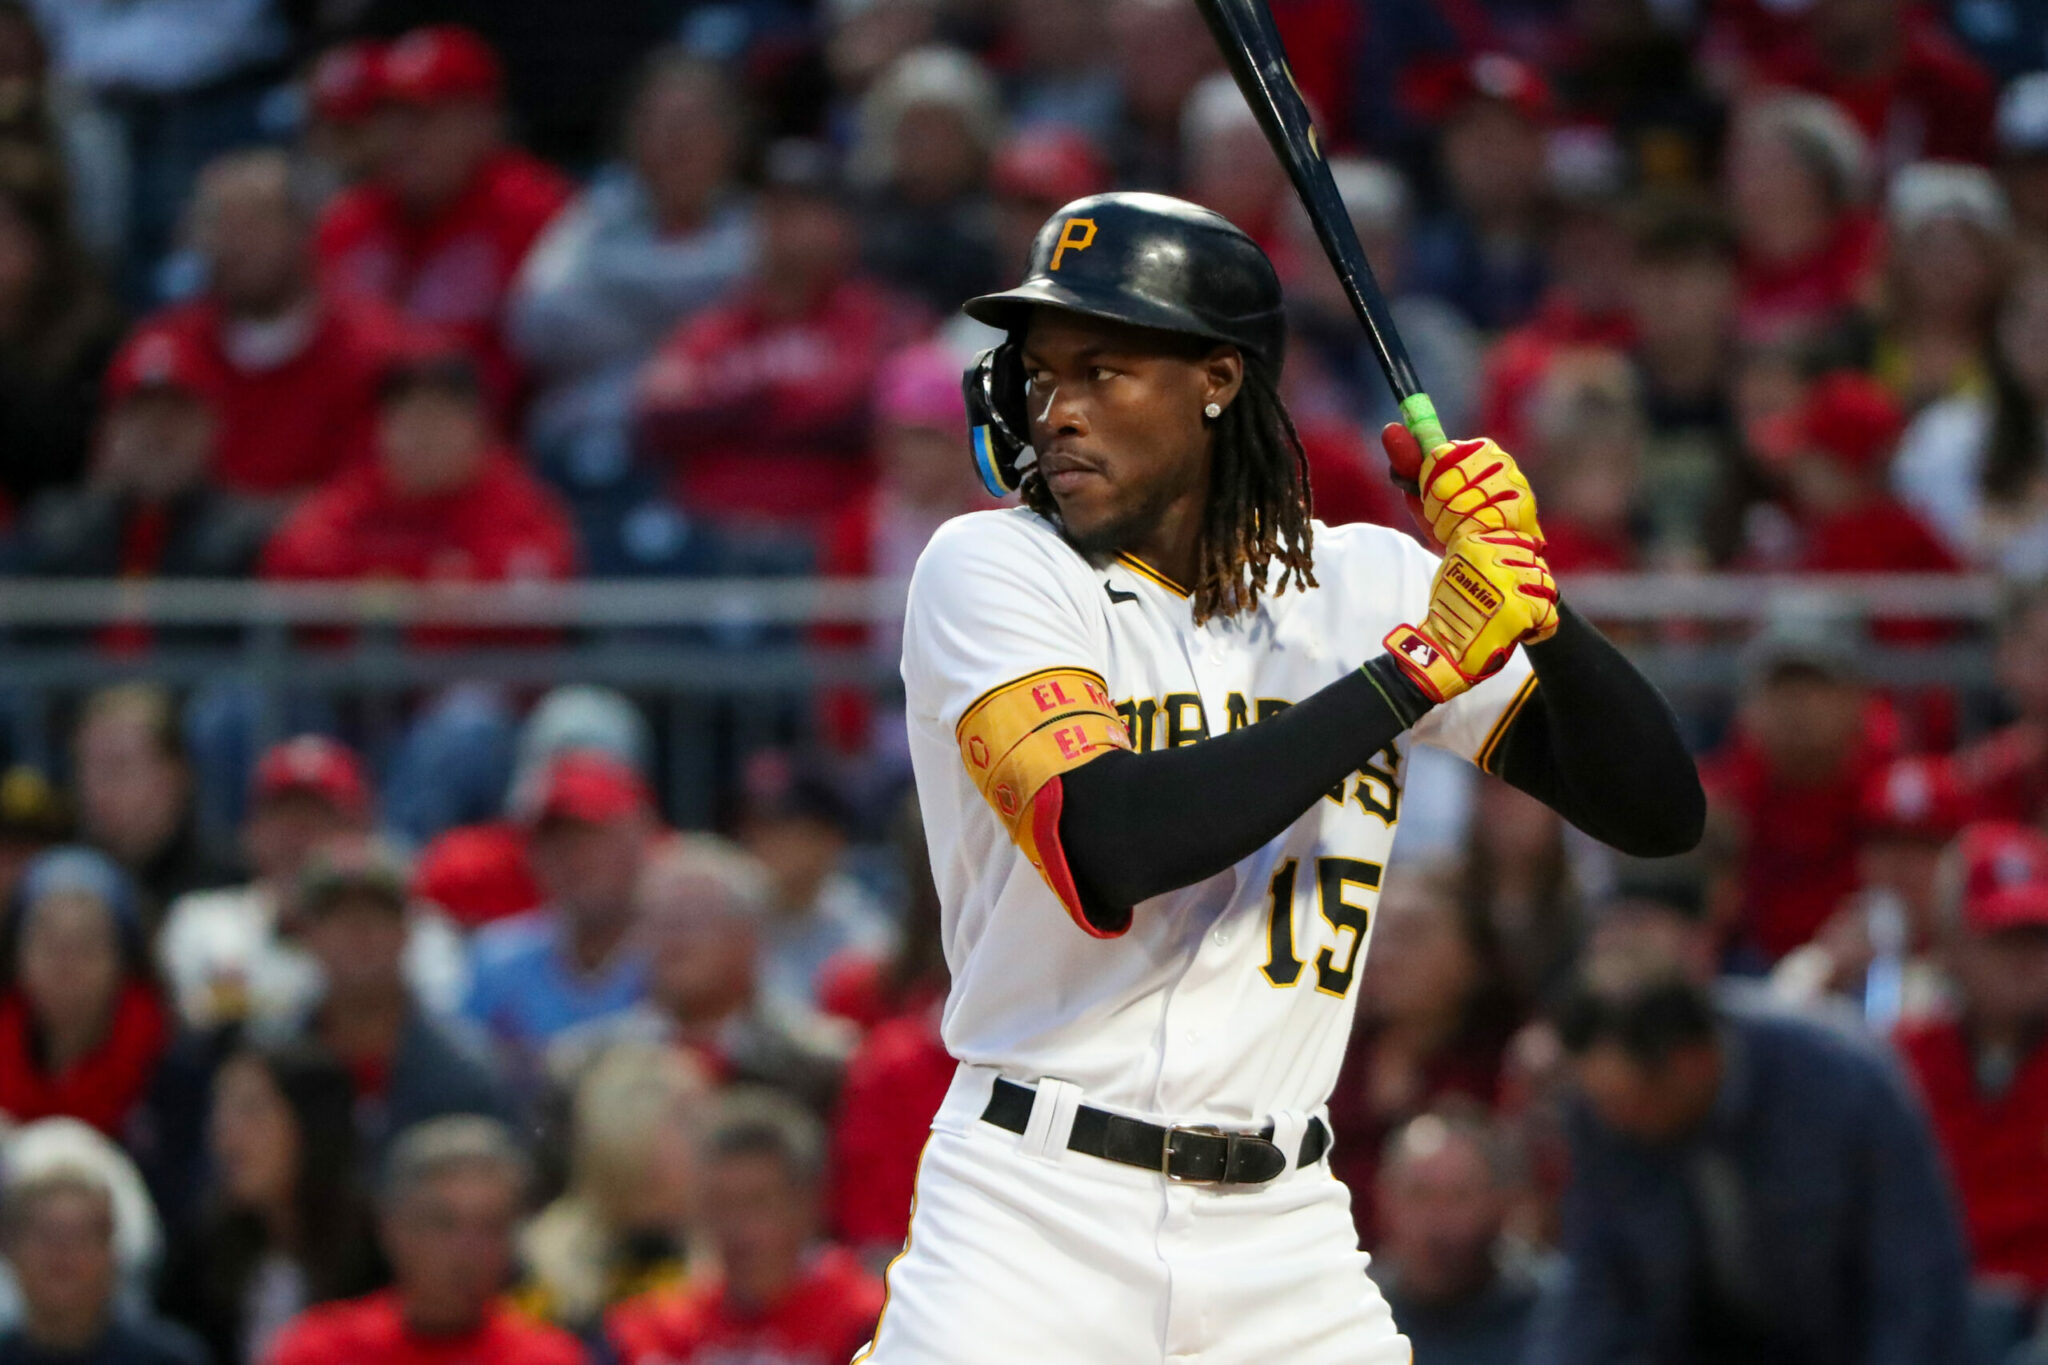 After surgery on fractured left ankle, Pirates SS Oneil Cruz